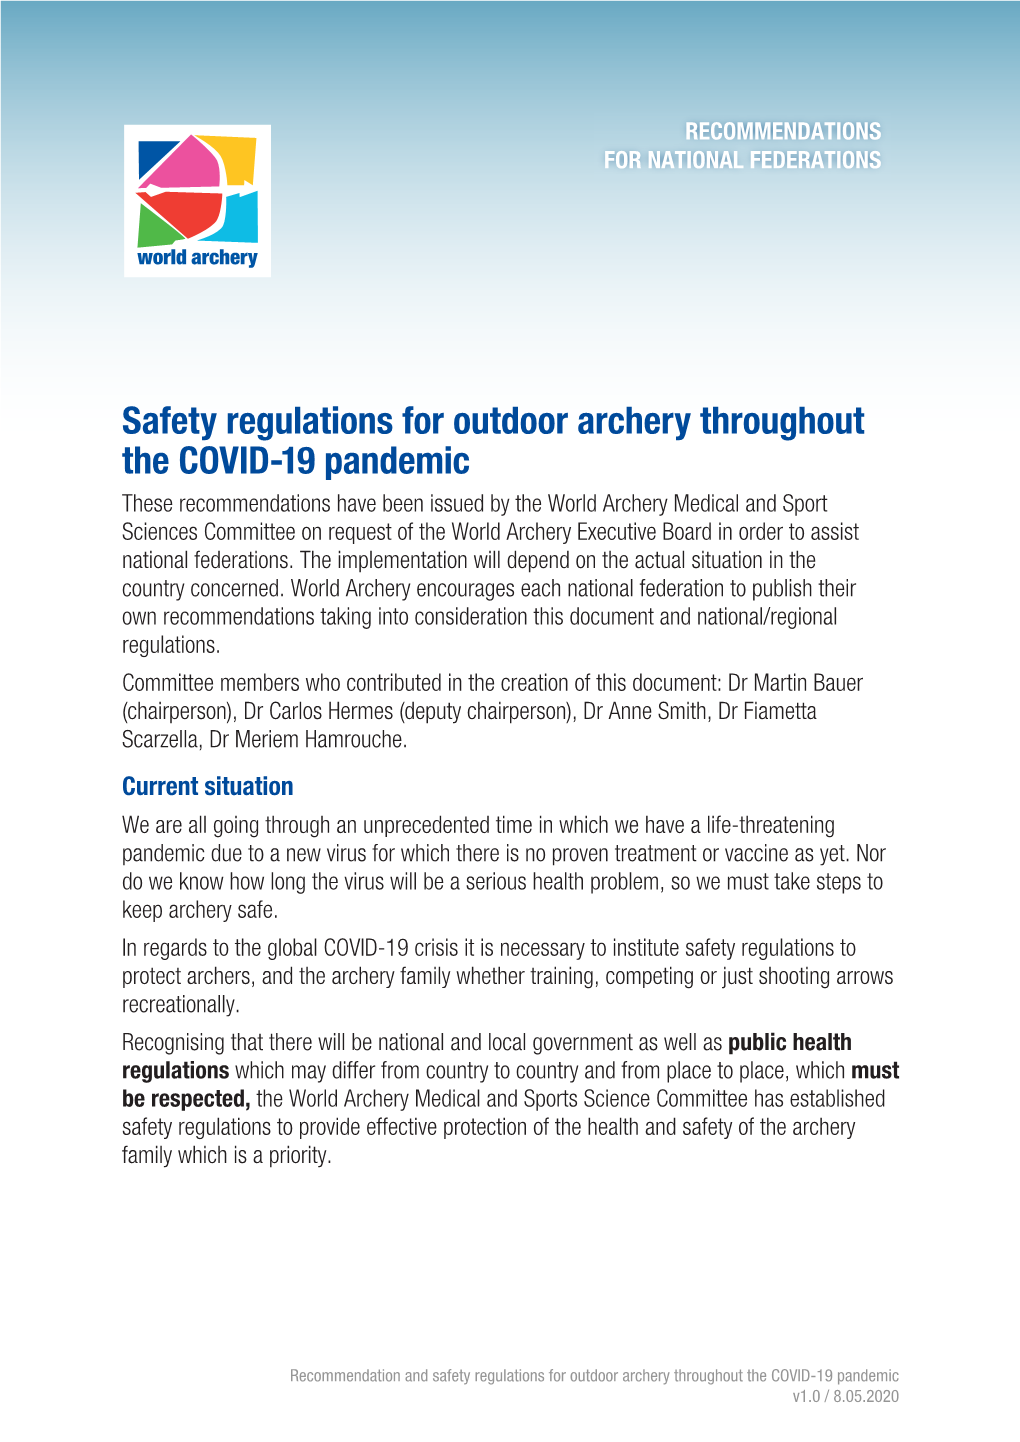 Safety Regulations for Outdoor Archery Throughout the COVID-19 Pandemic